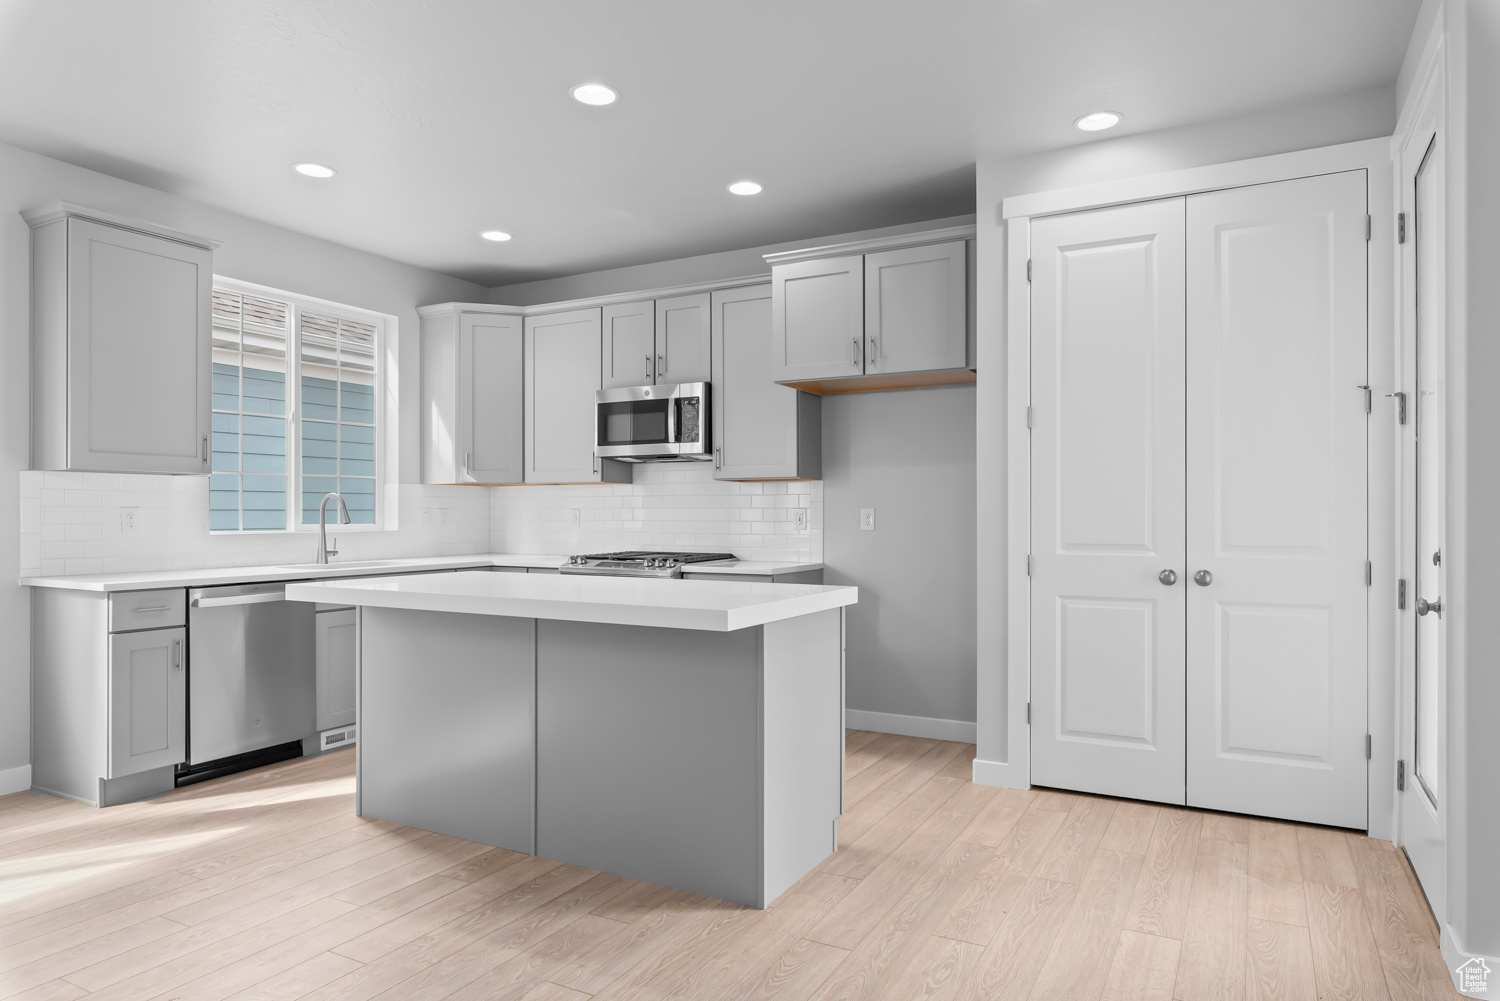 Kitchen featuring a center island, gray cabinets, appliances with stainless steel finishes, tasteful backsplash, and light hardwood / wood-style floors